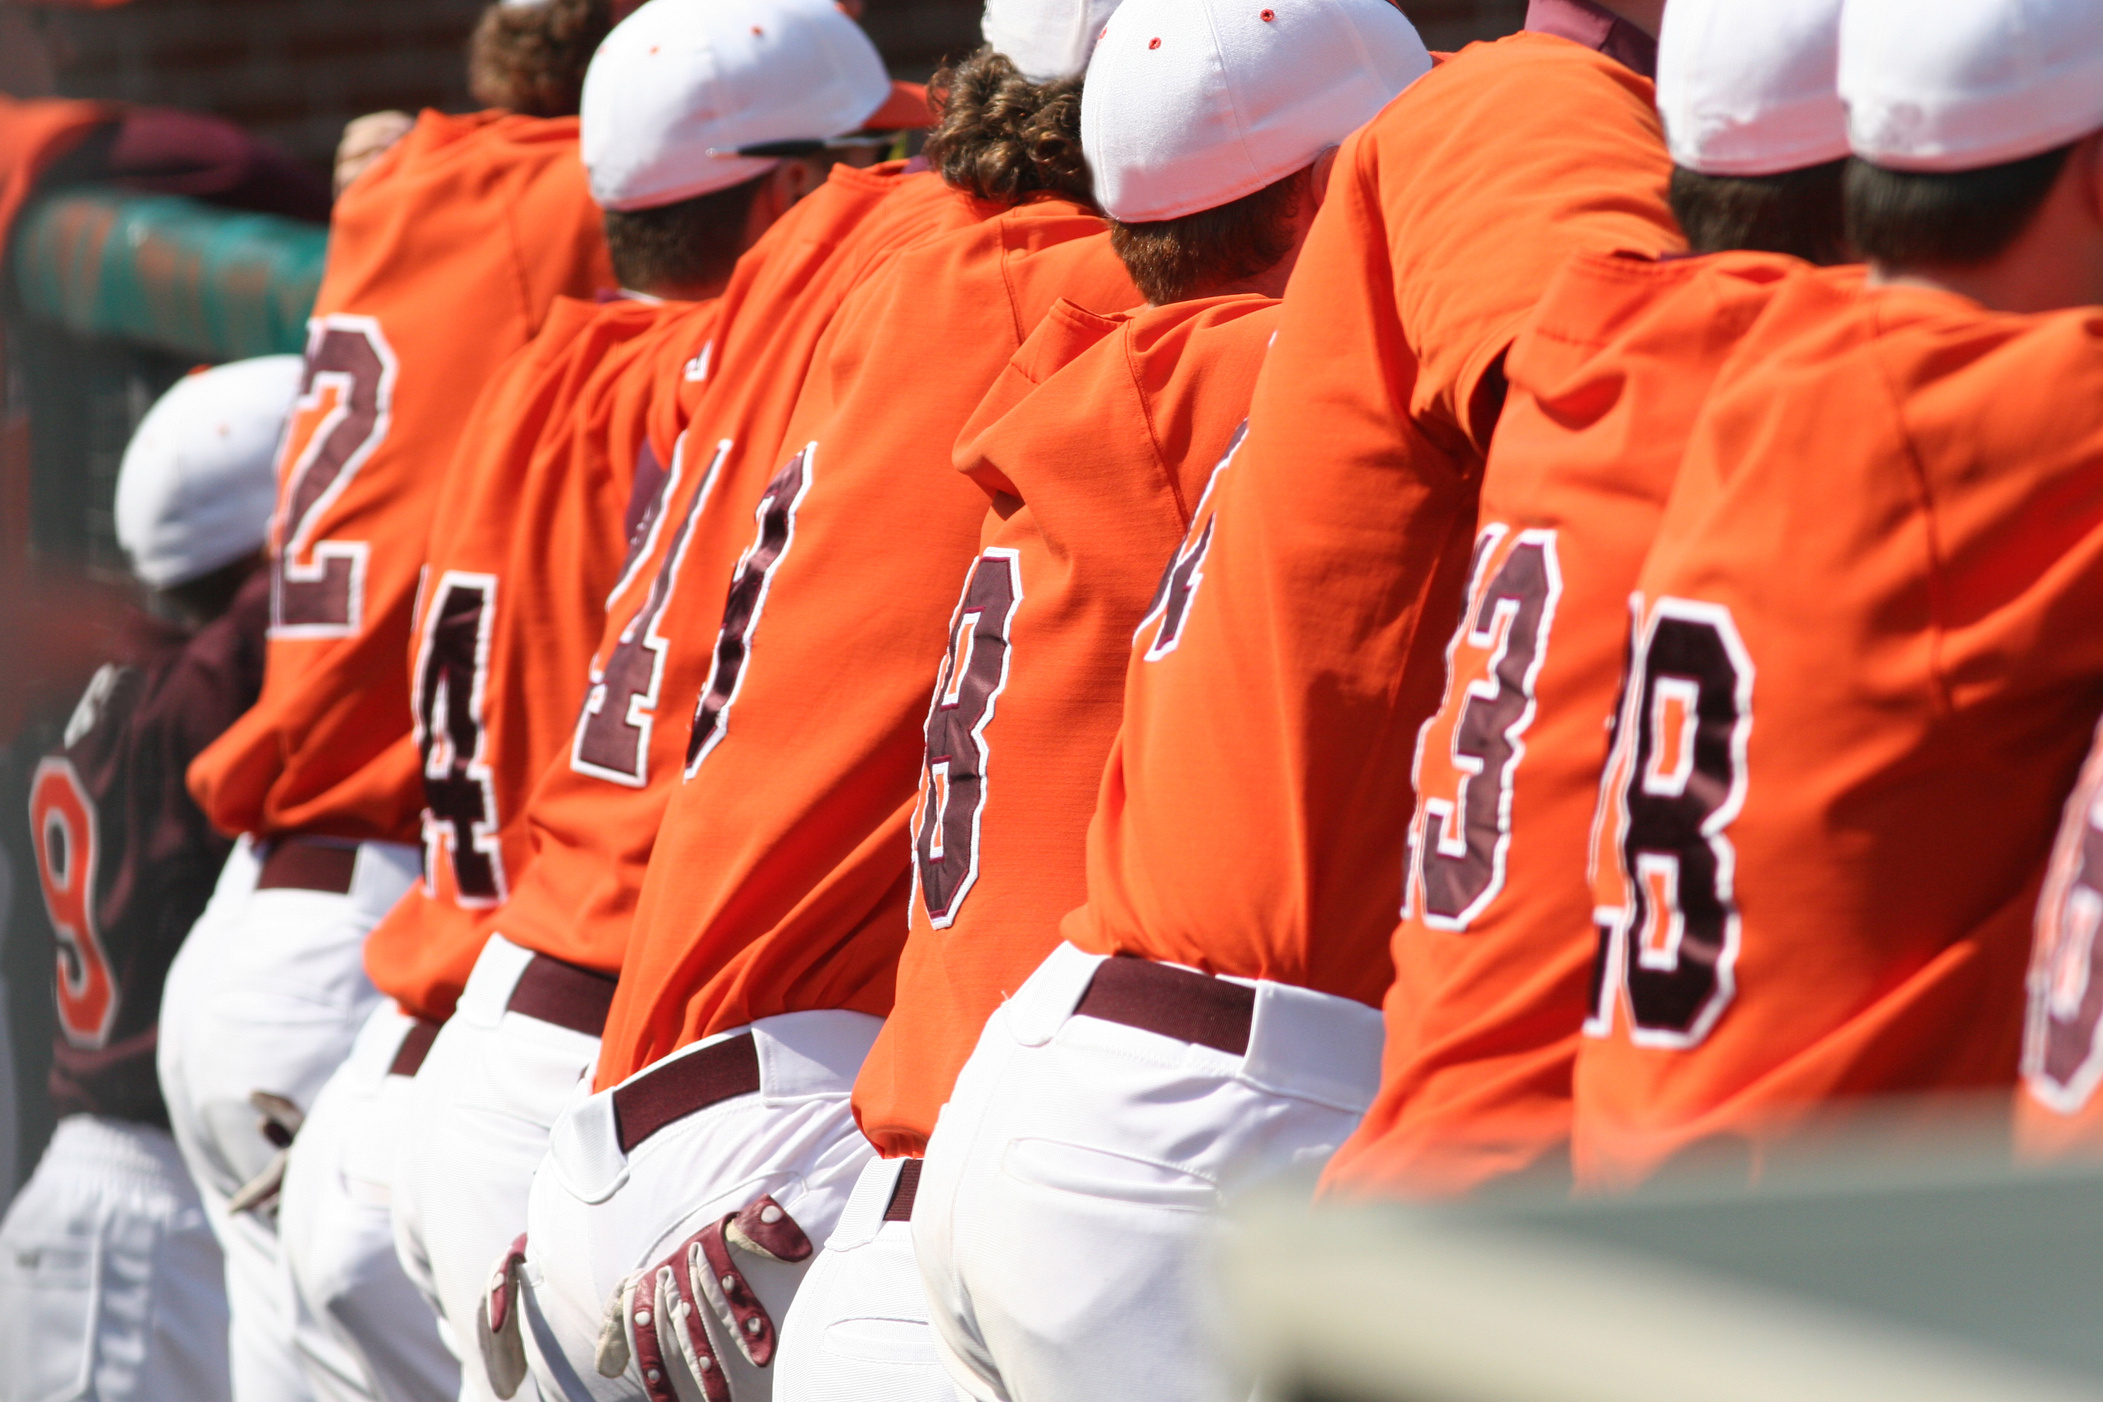 Back view of a baseball team in orange uniforms